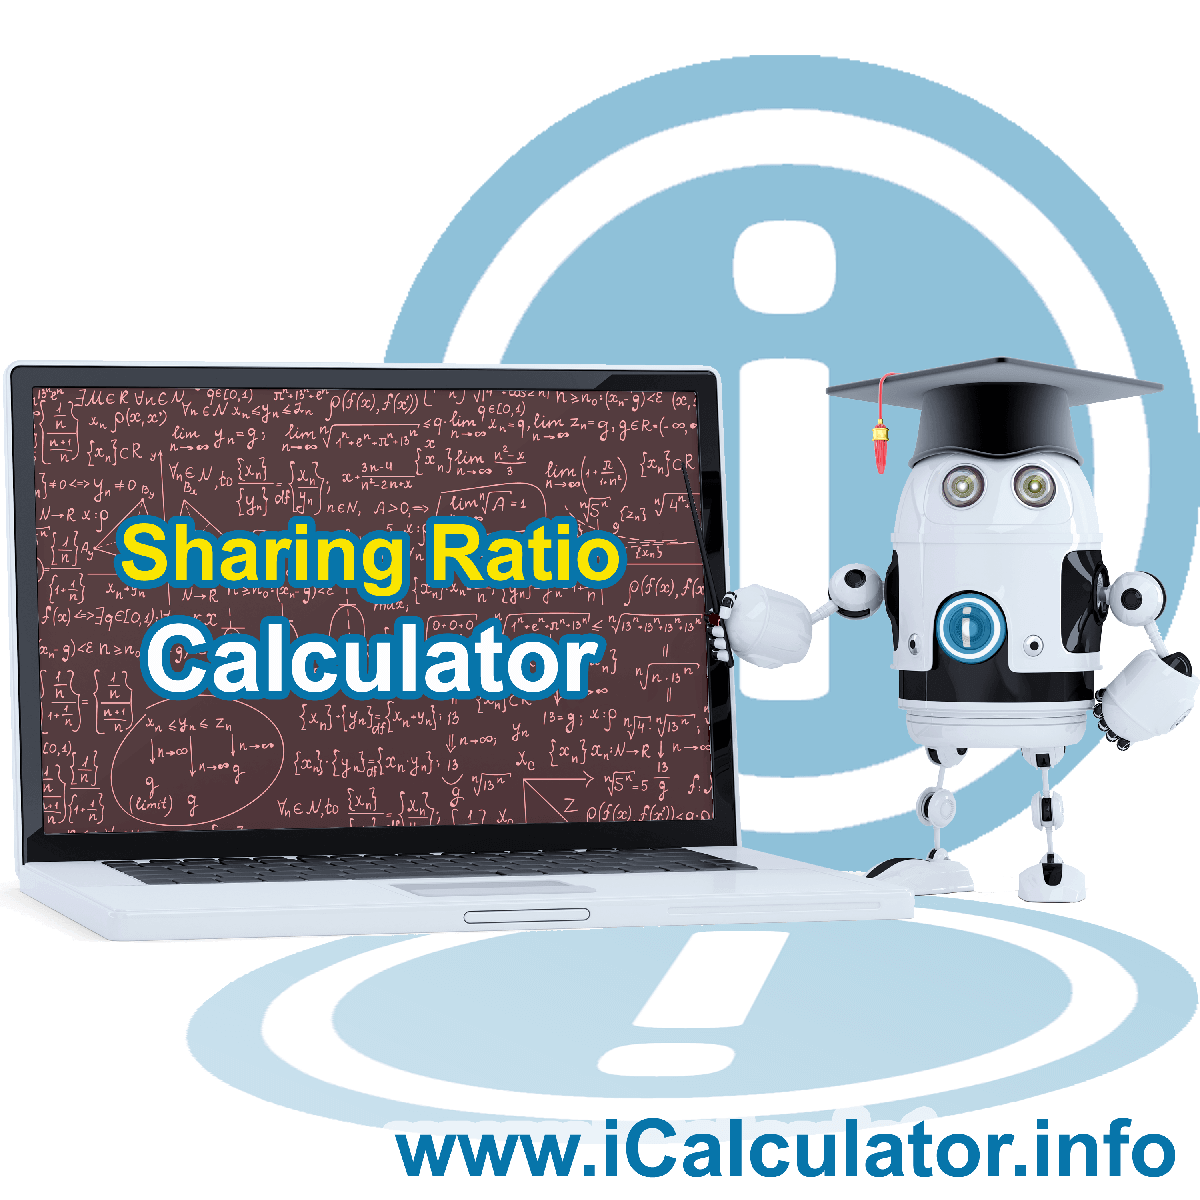 Sharing Ratio. This image shows the properties and sharing ratio formula for the Sharing Ratio